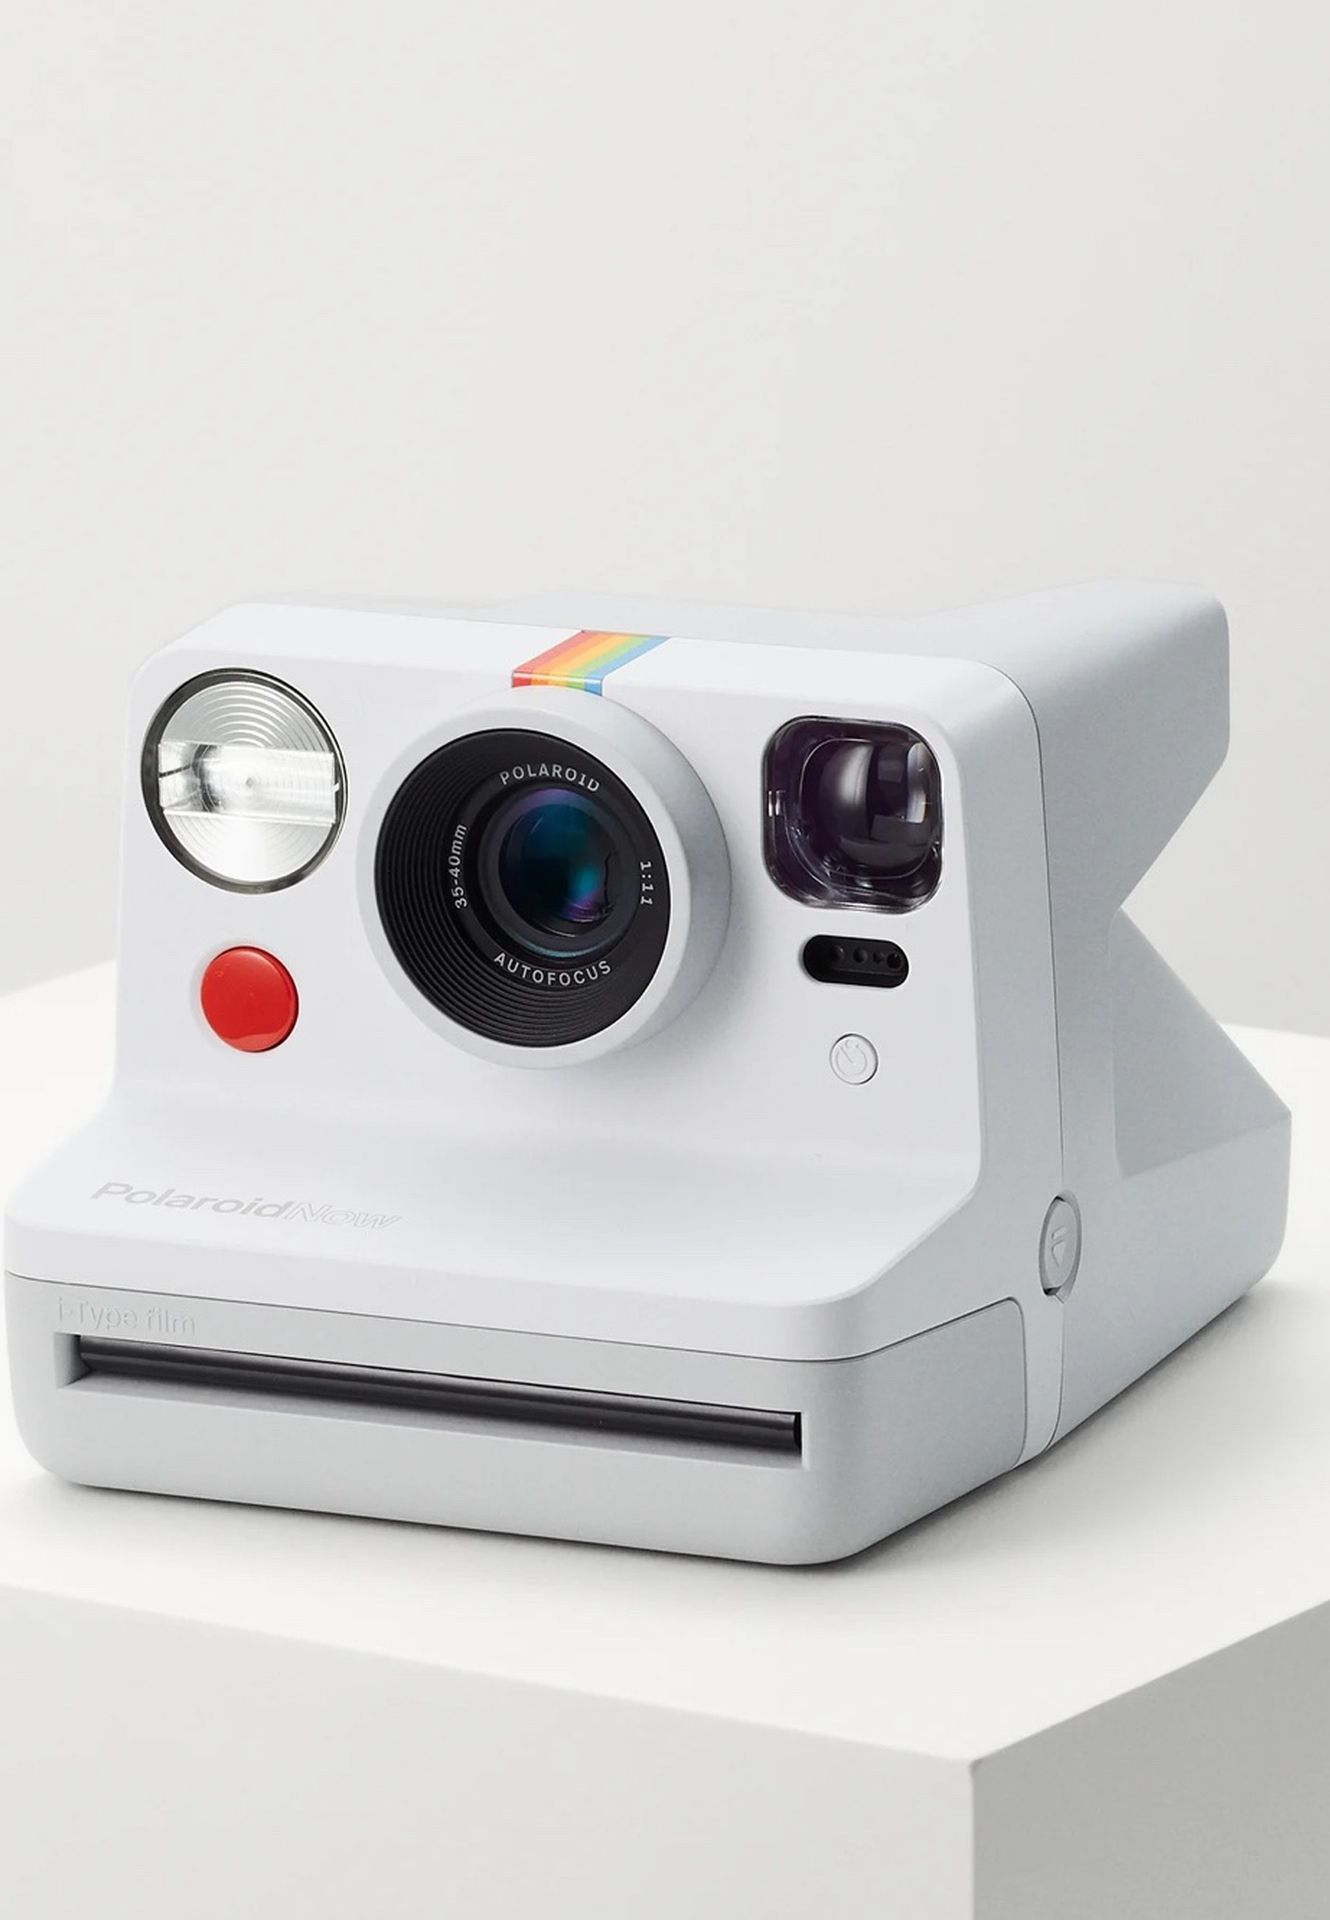 Polaroid Camera Bought A Month Ago Never Used It!!